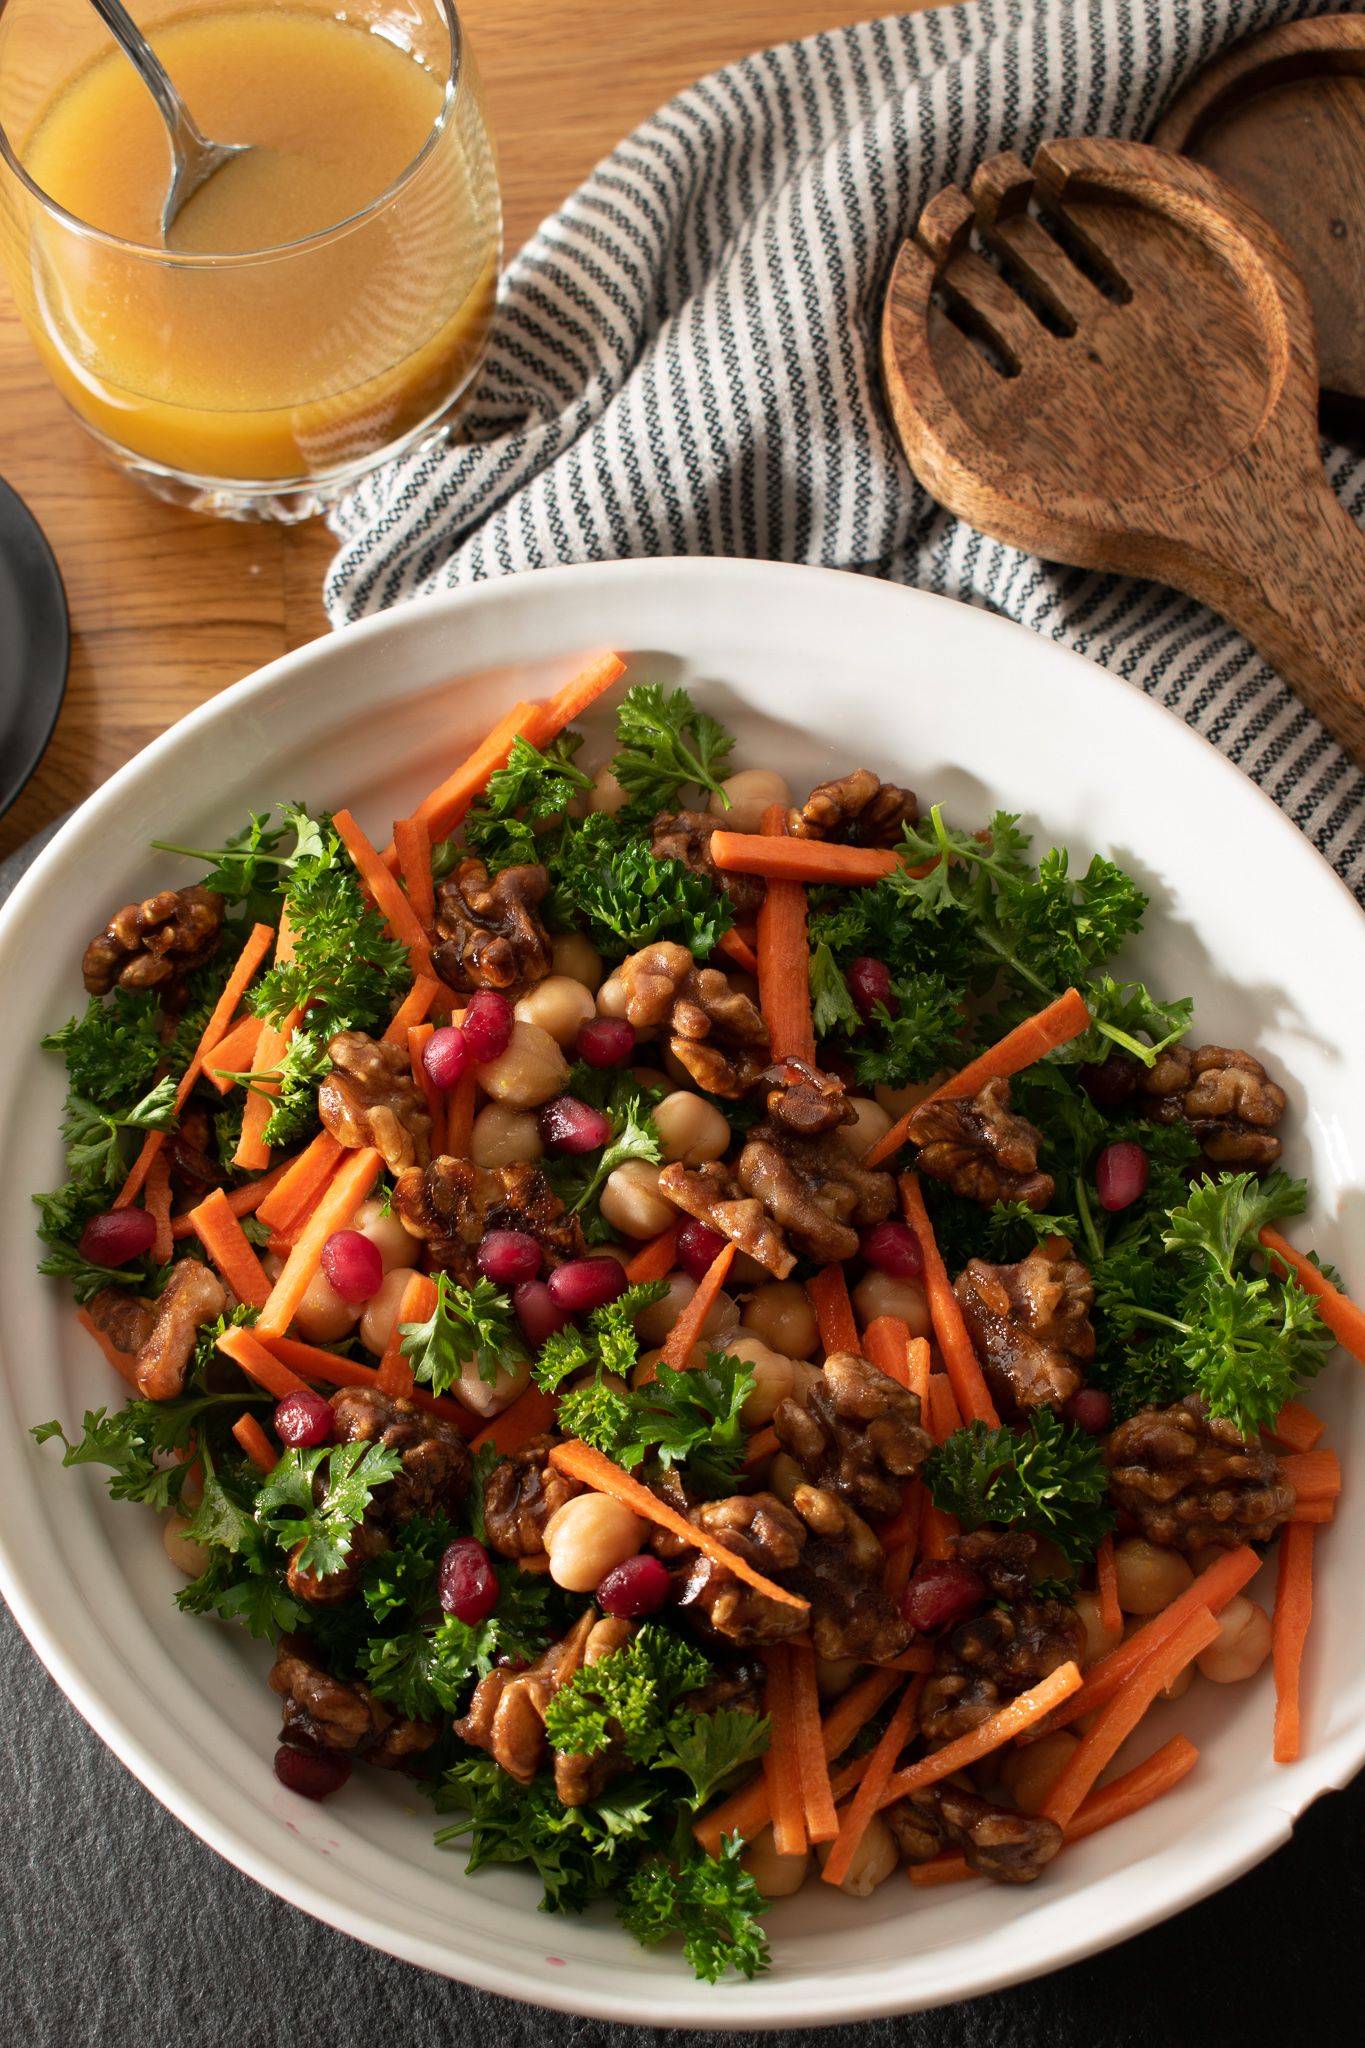 Chickpea Salad with pomegranate, carrots, candied walnuts